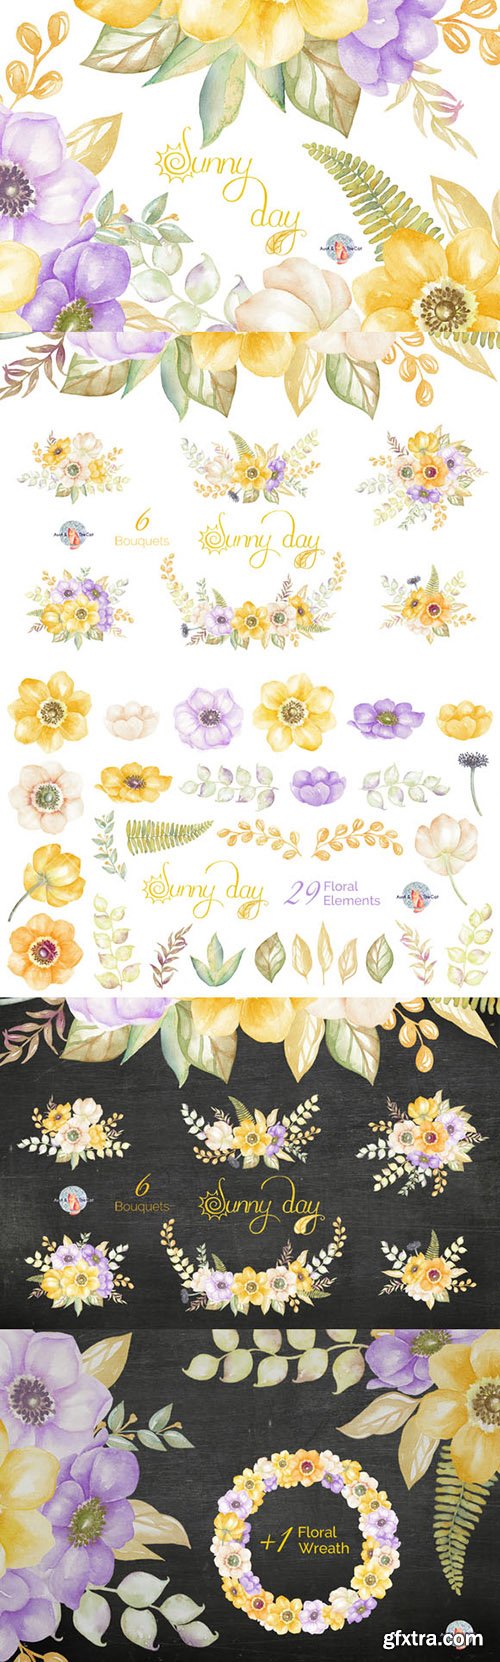 Sunny Day Watercolor Clipart - CM 484116